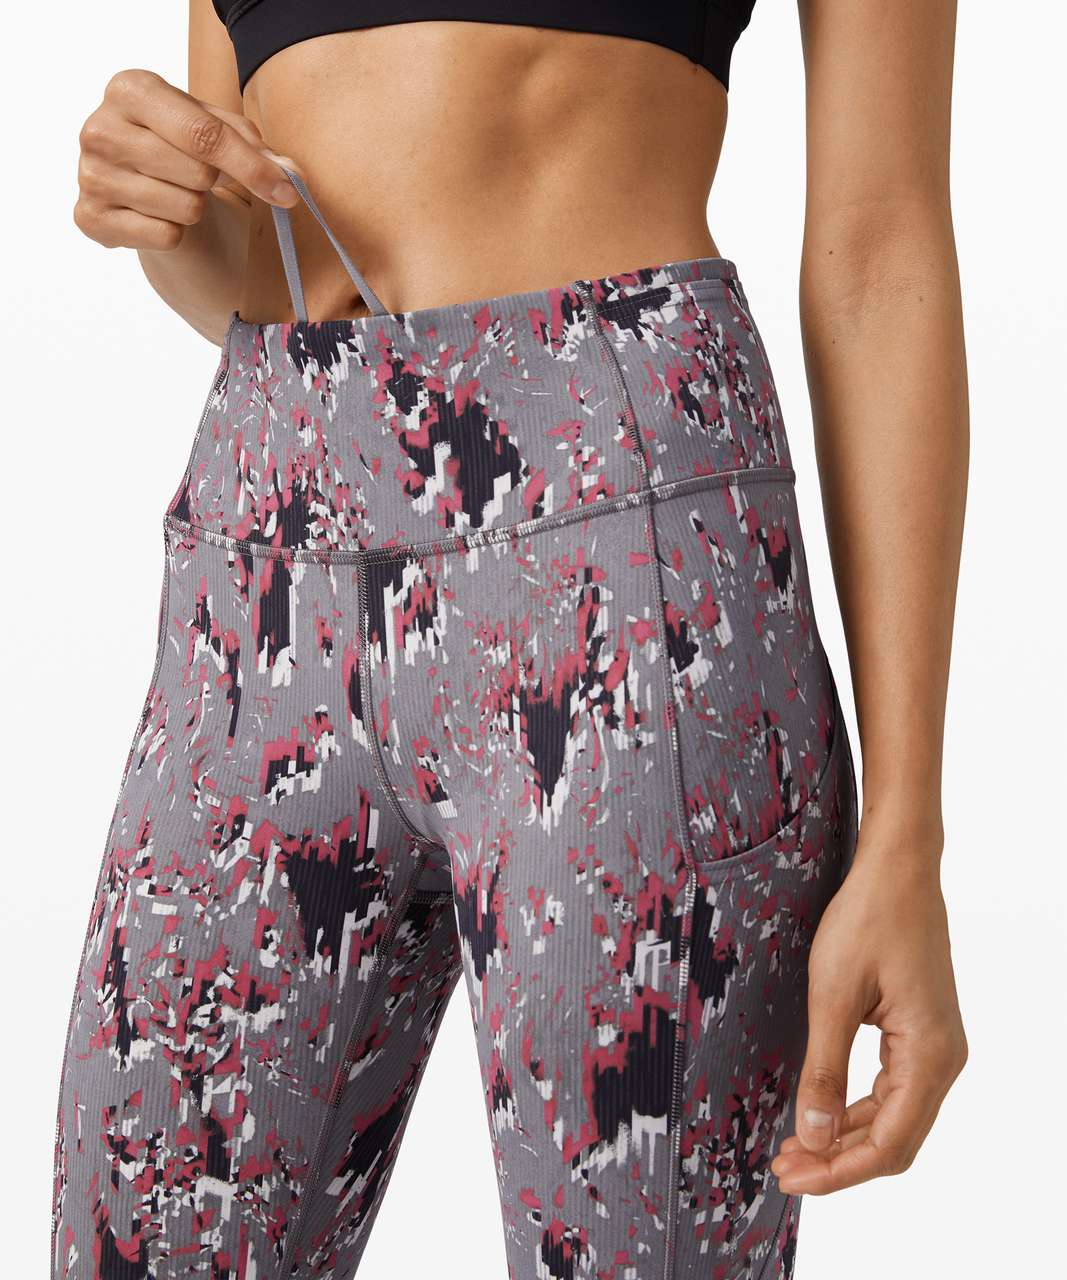 Lululemon Fast and Free High Rise Tight 25" - Floral Flux Multi